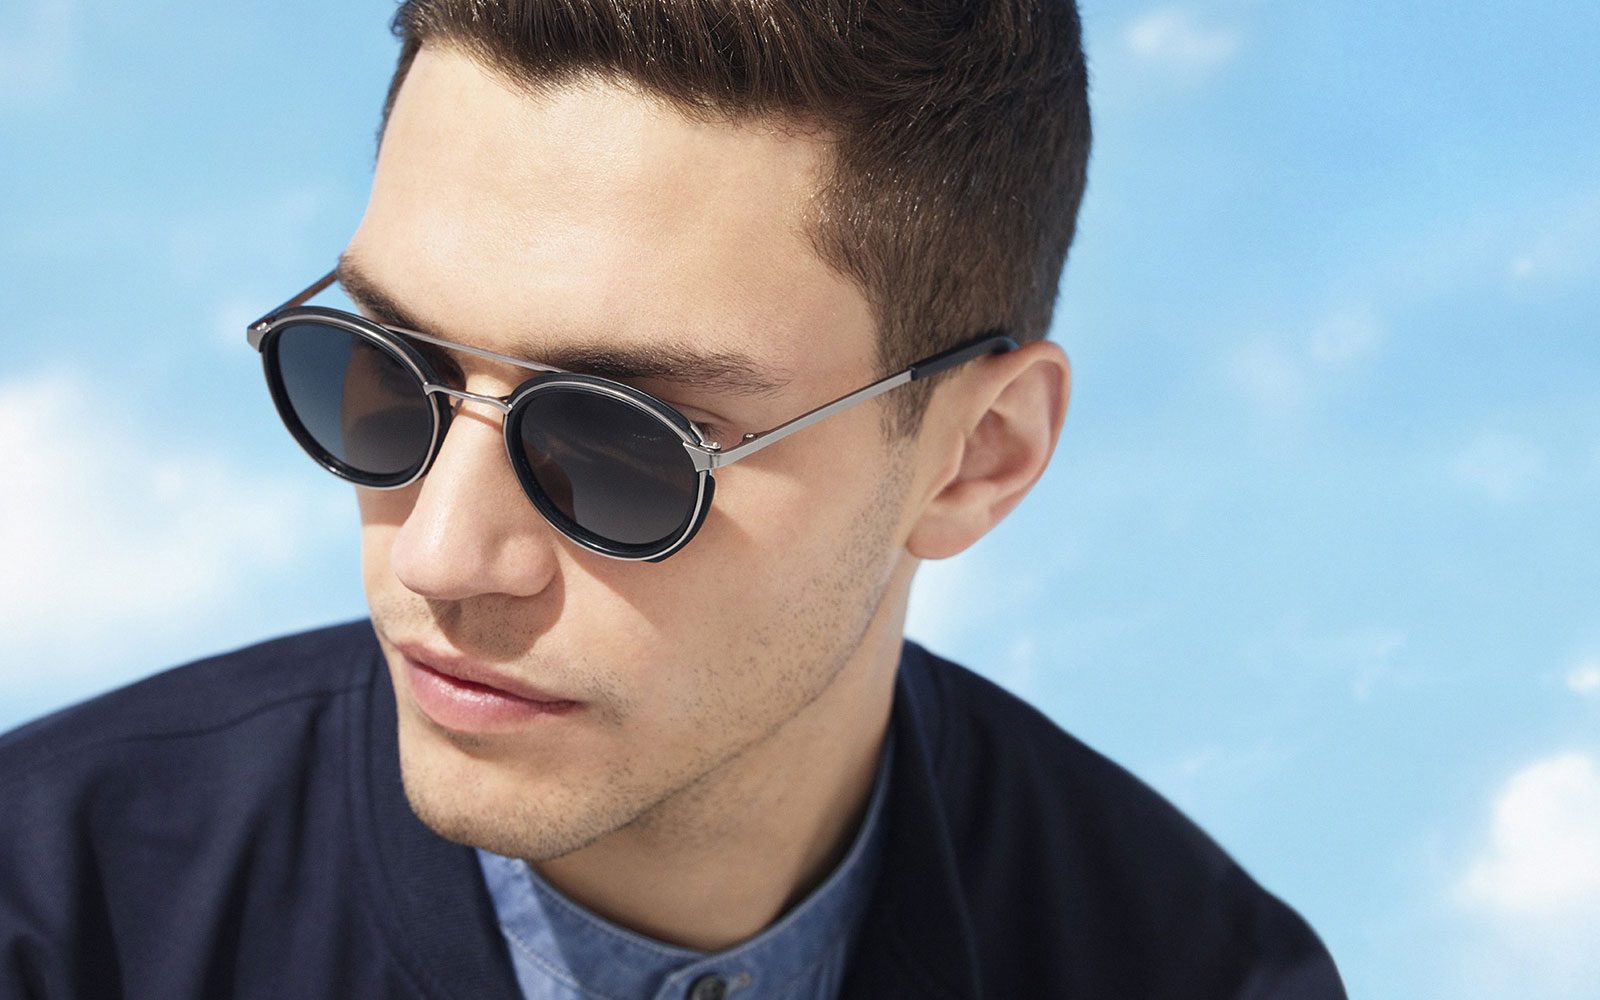 The Best Men's Sunglasses for Your Face Shape - The GentleManual